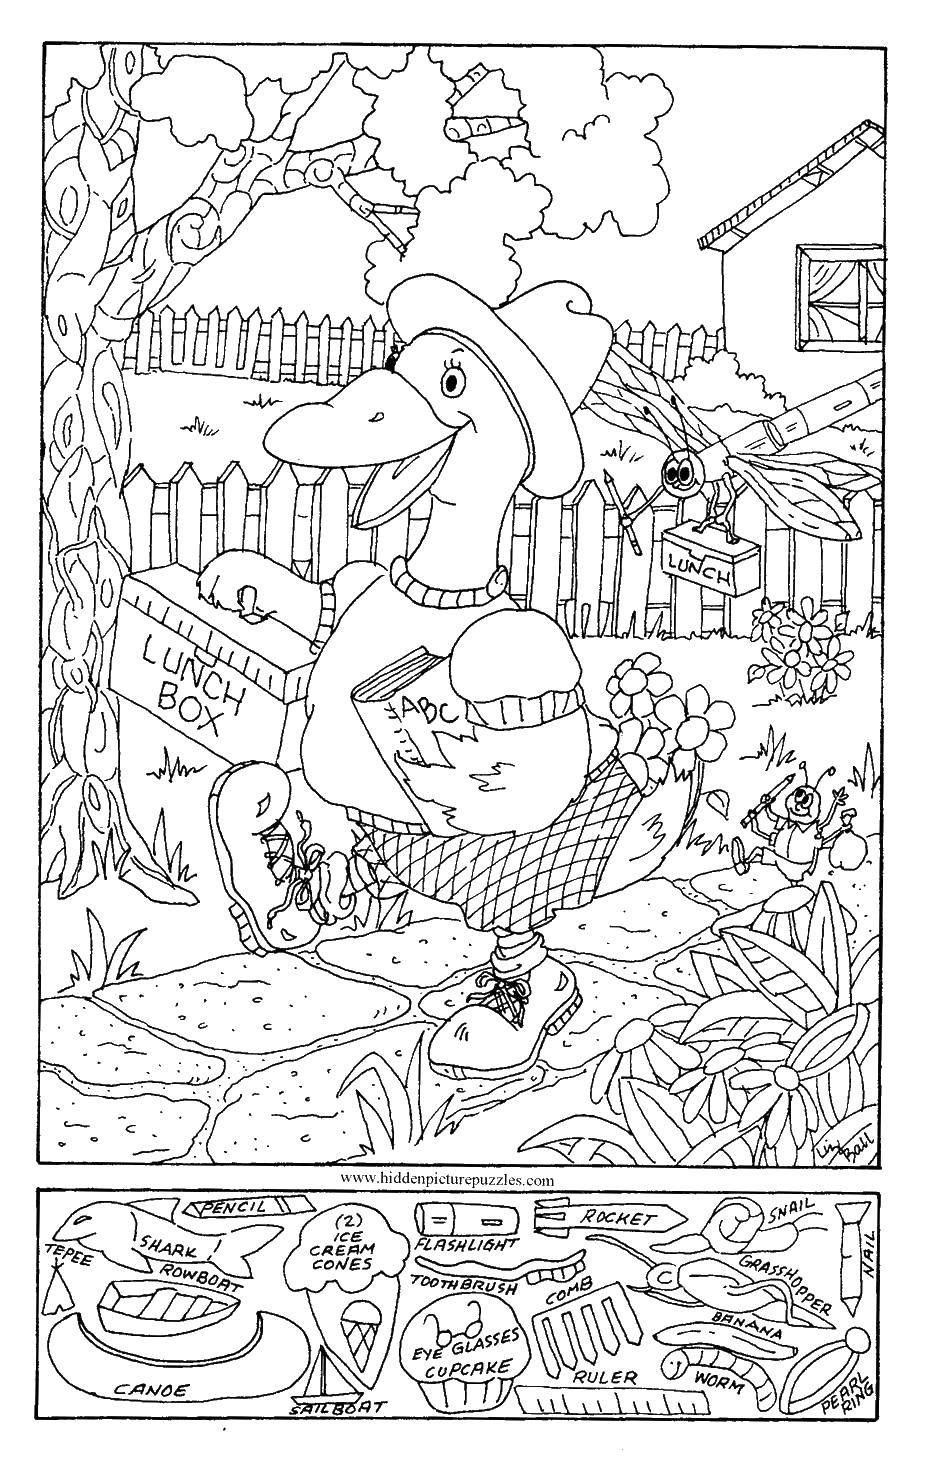 Coloring Duck goes to school. Category Find what is hidden. Tags:  Duck, bird.